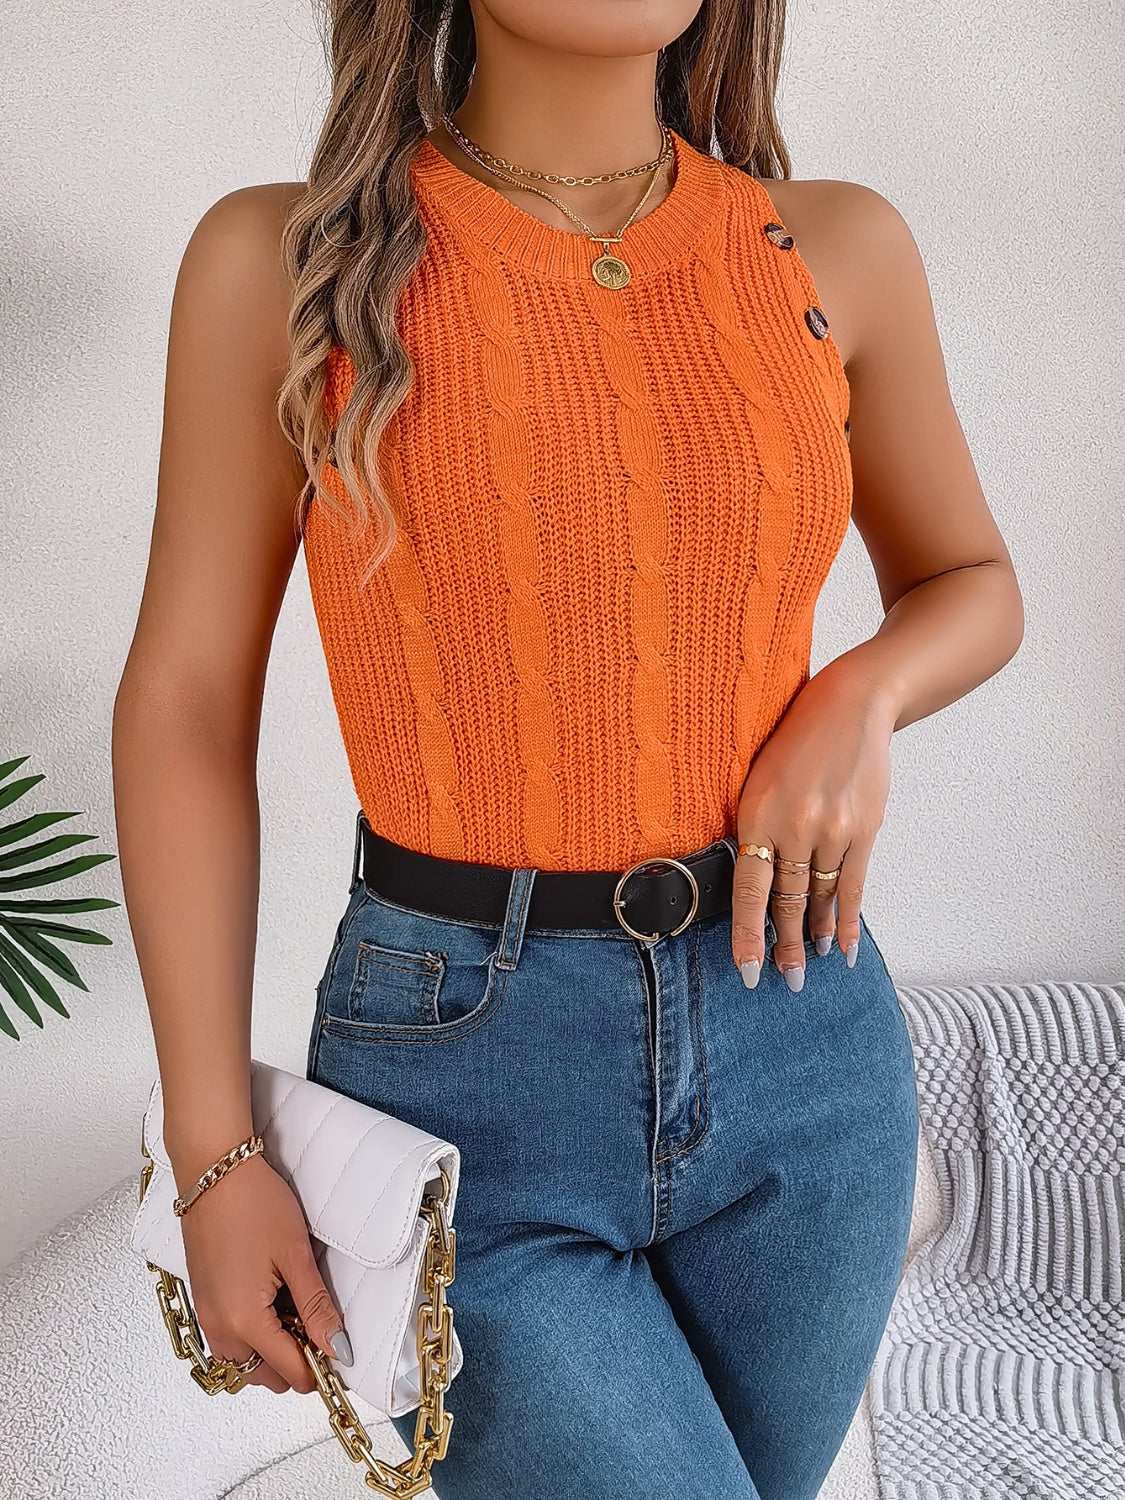 TEEK - Cable-Knit Round Neck Vest Top TOPS TEEK Trend   